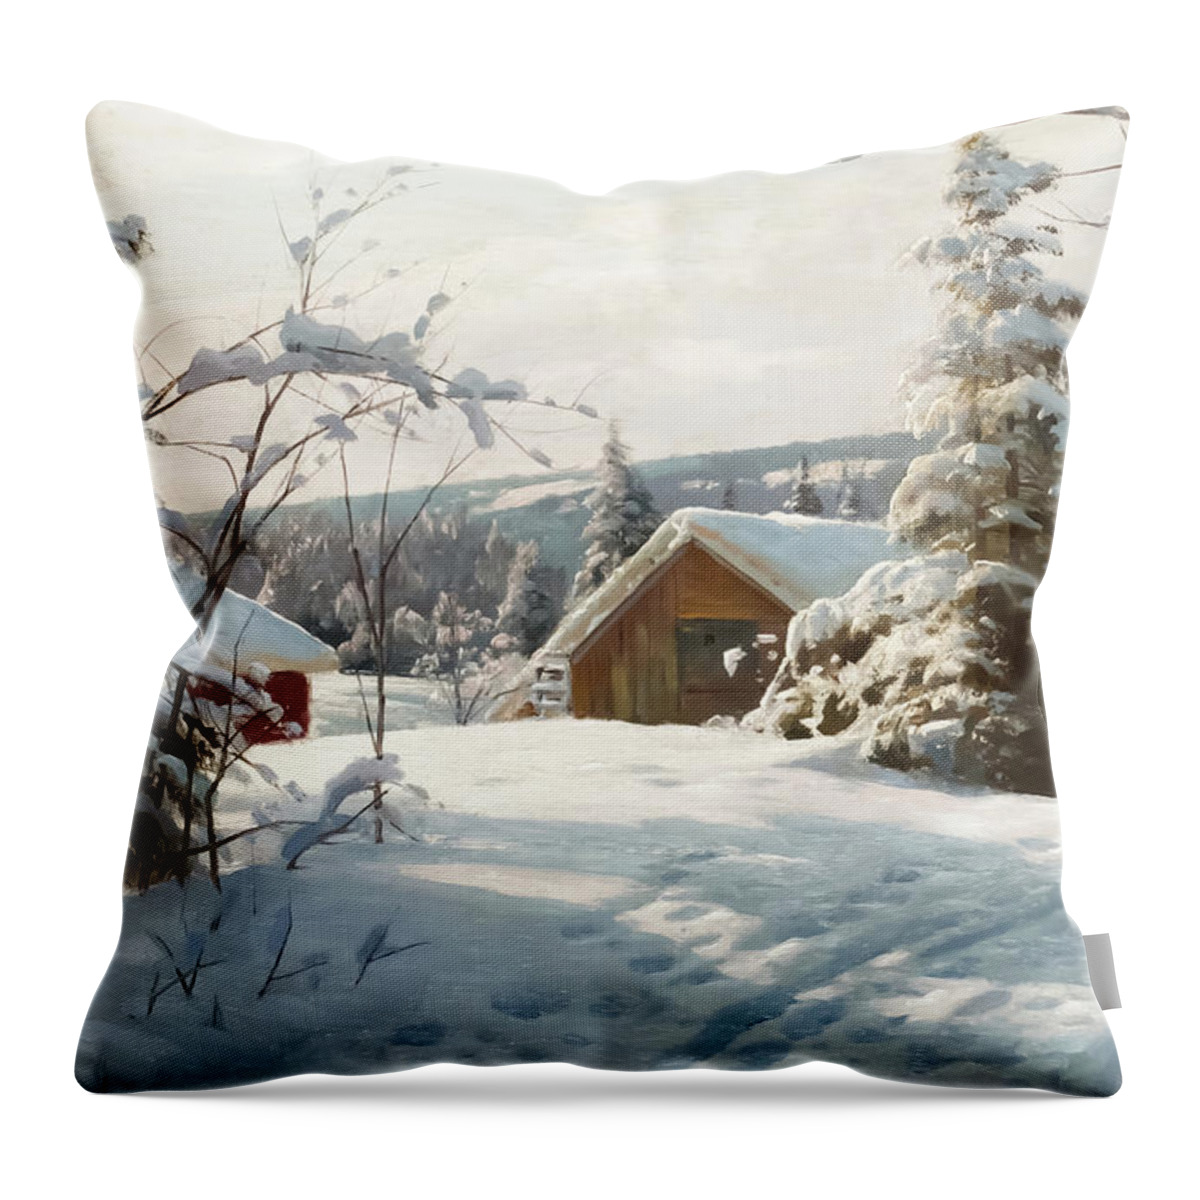 Sunlit Throw Pillow featuring the painting Sunlit Winter Landscape #2 by Peder Monsted